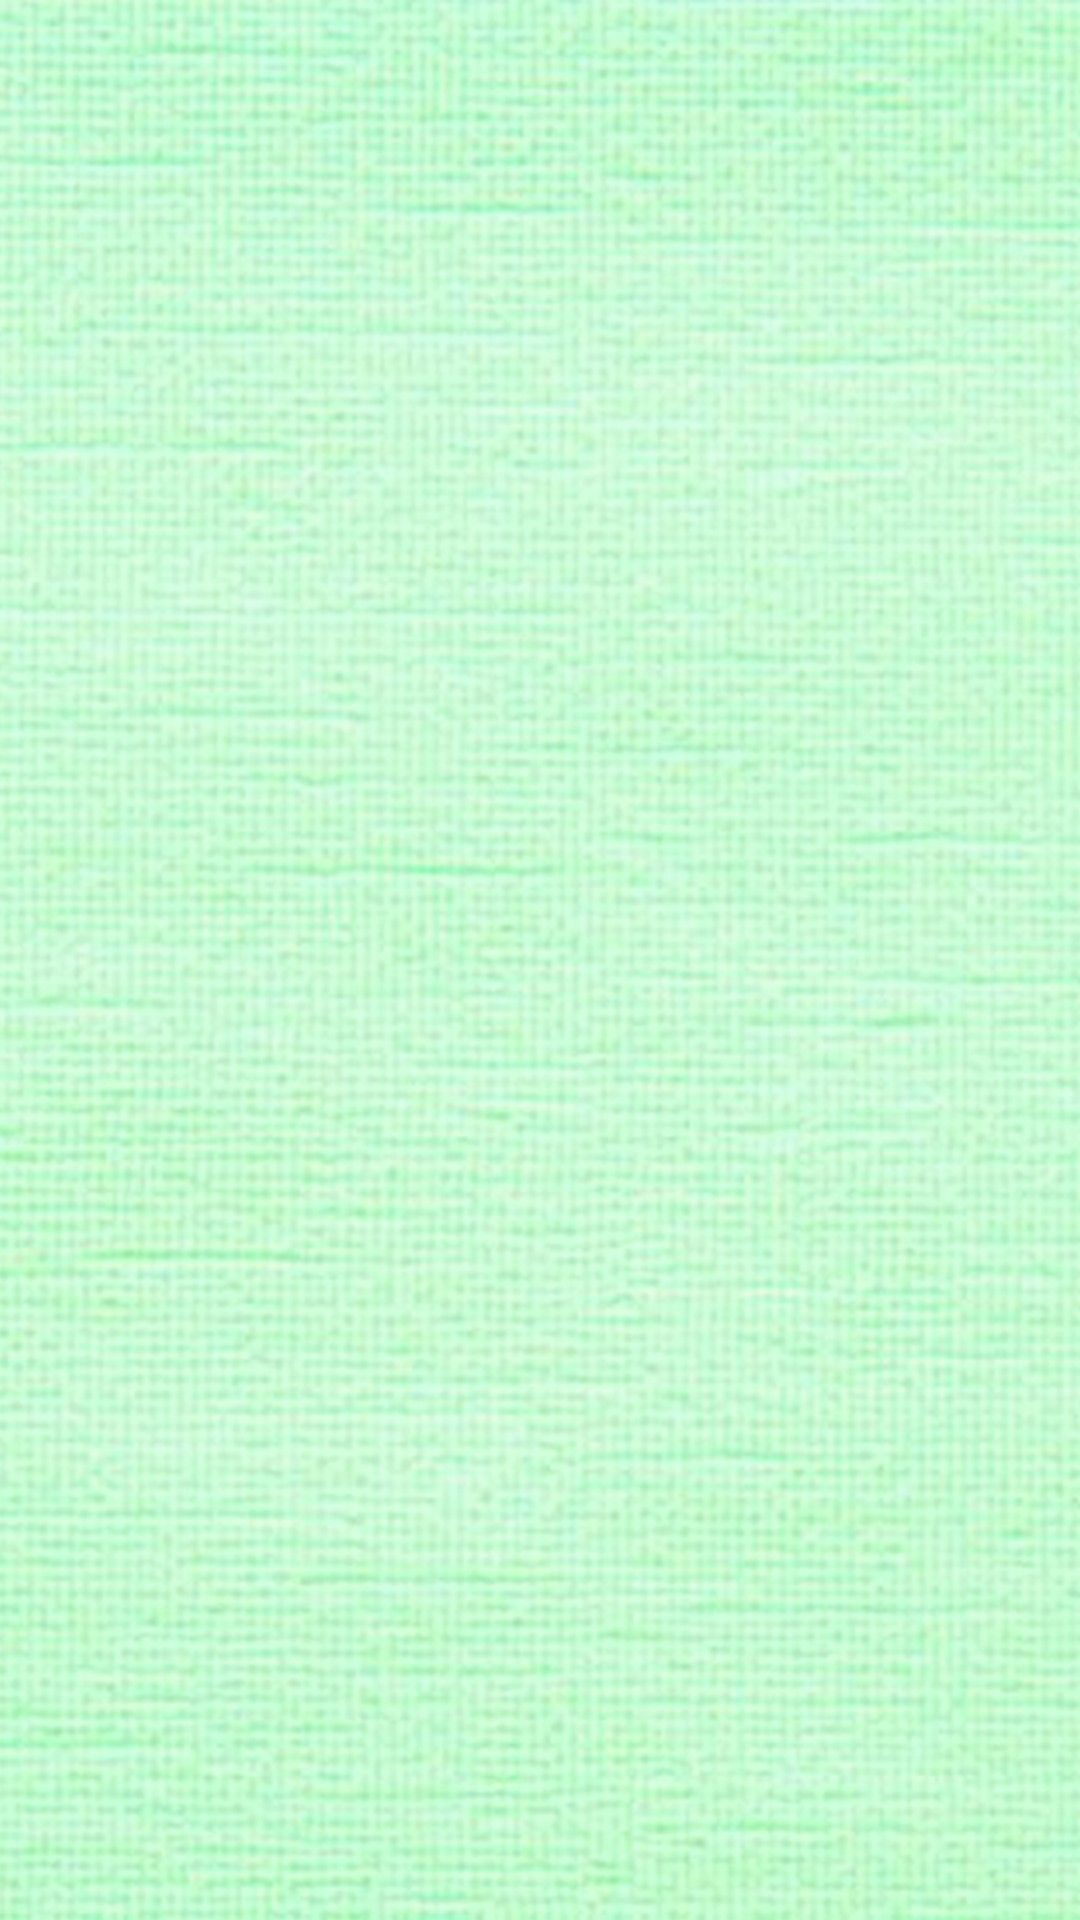 Green Colour Wallpaper For Android .3Dandroidwallpaper.com